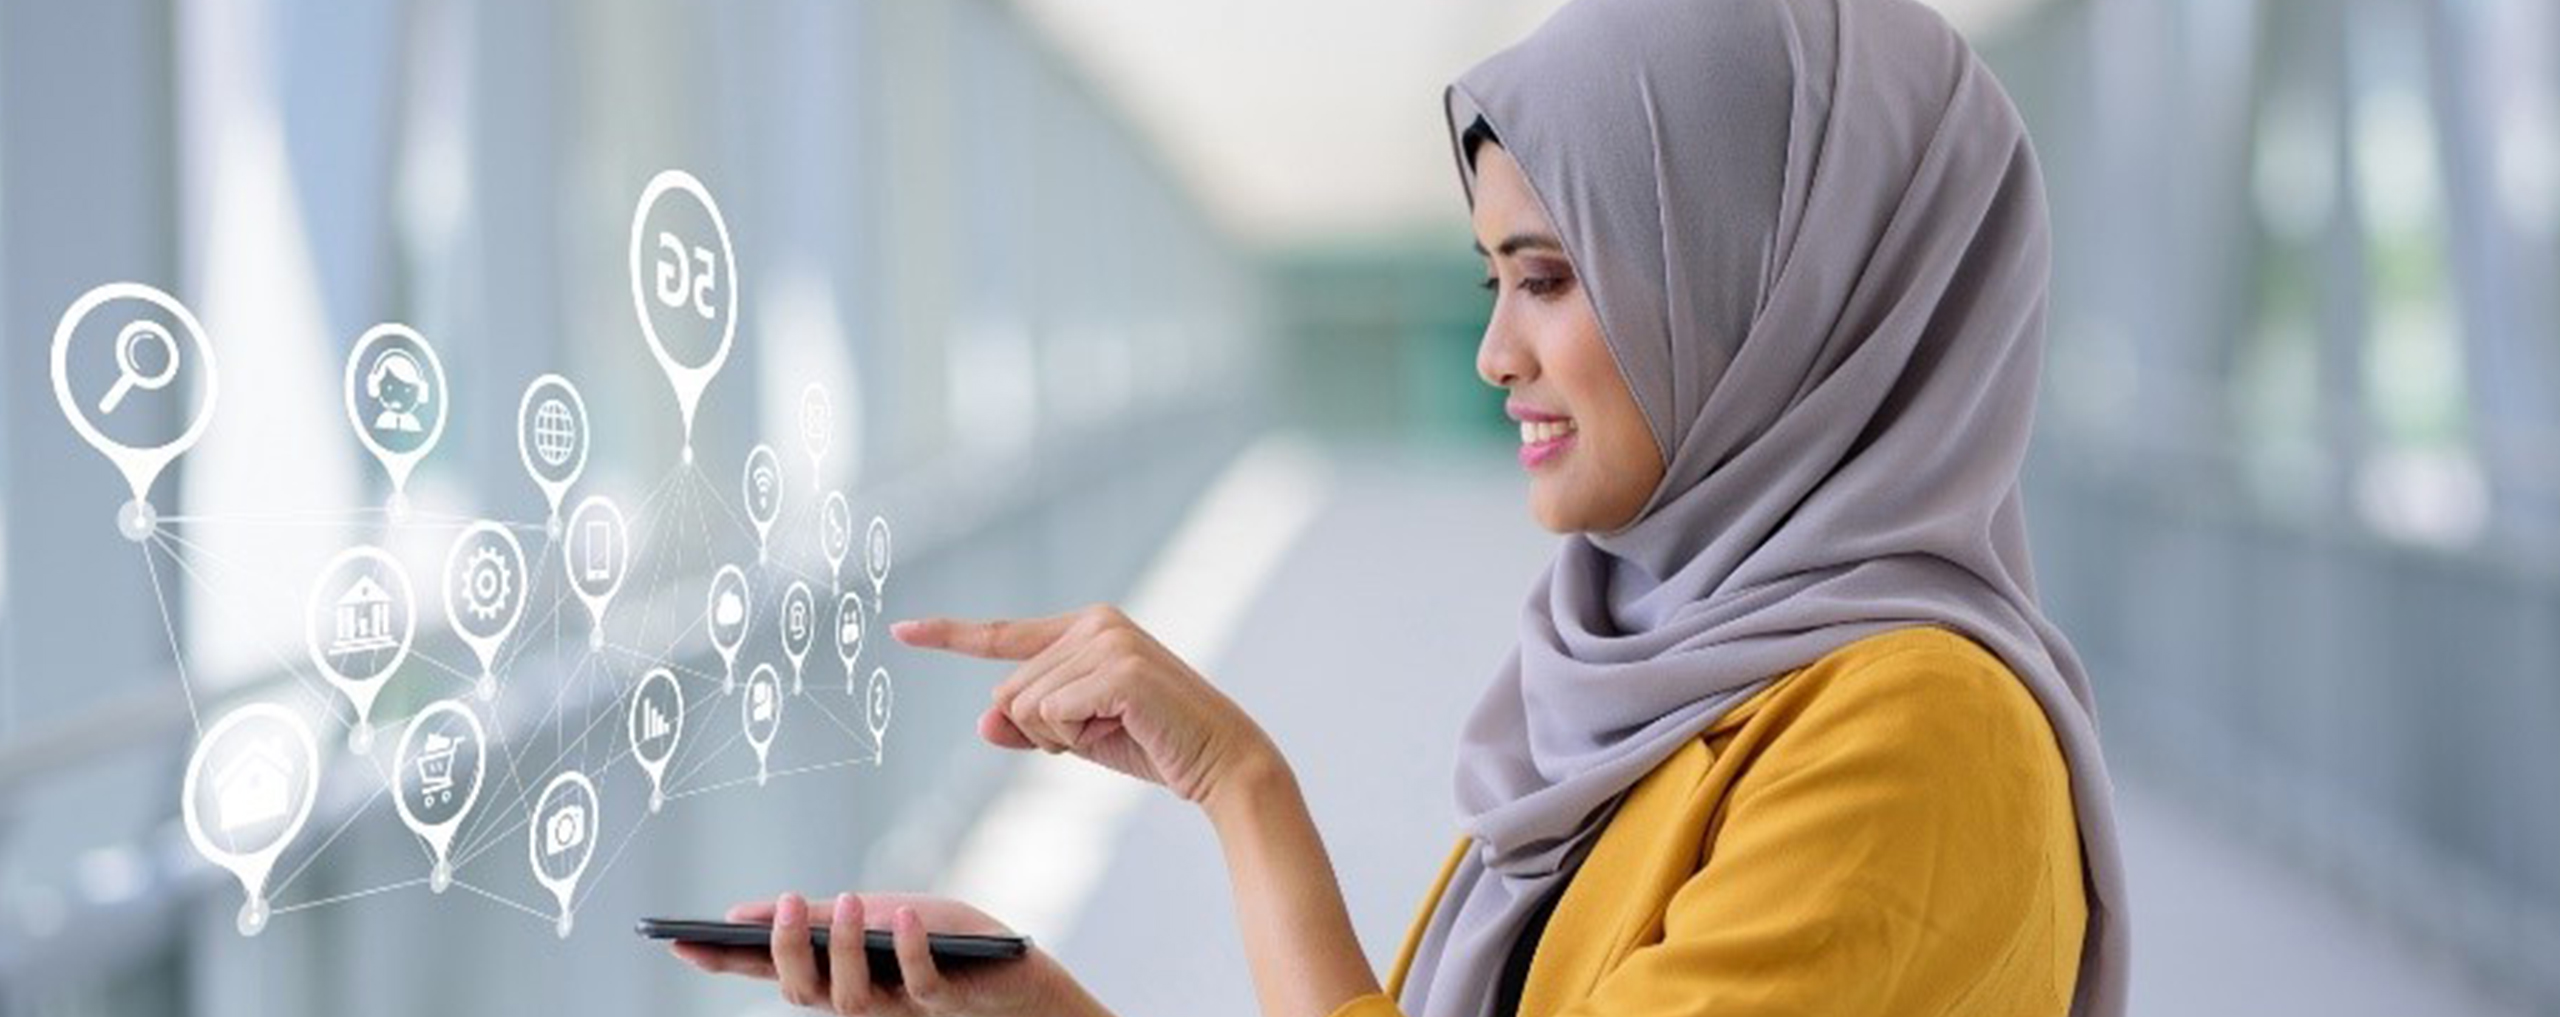 A woman in a hijab selecting icons floating above a smartphone.